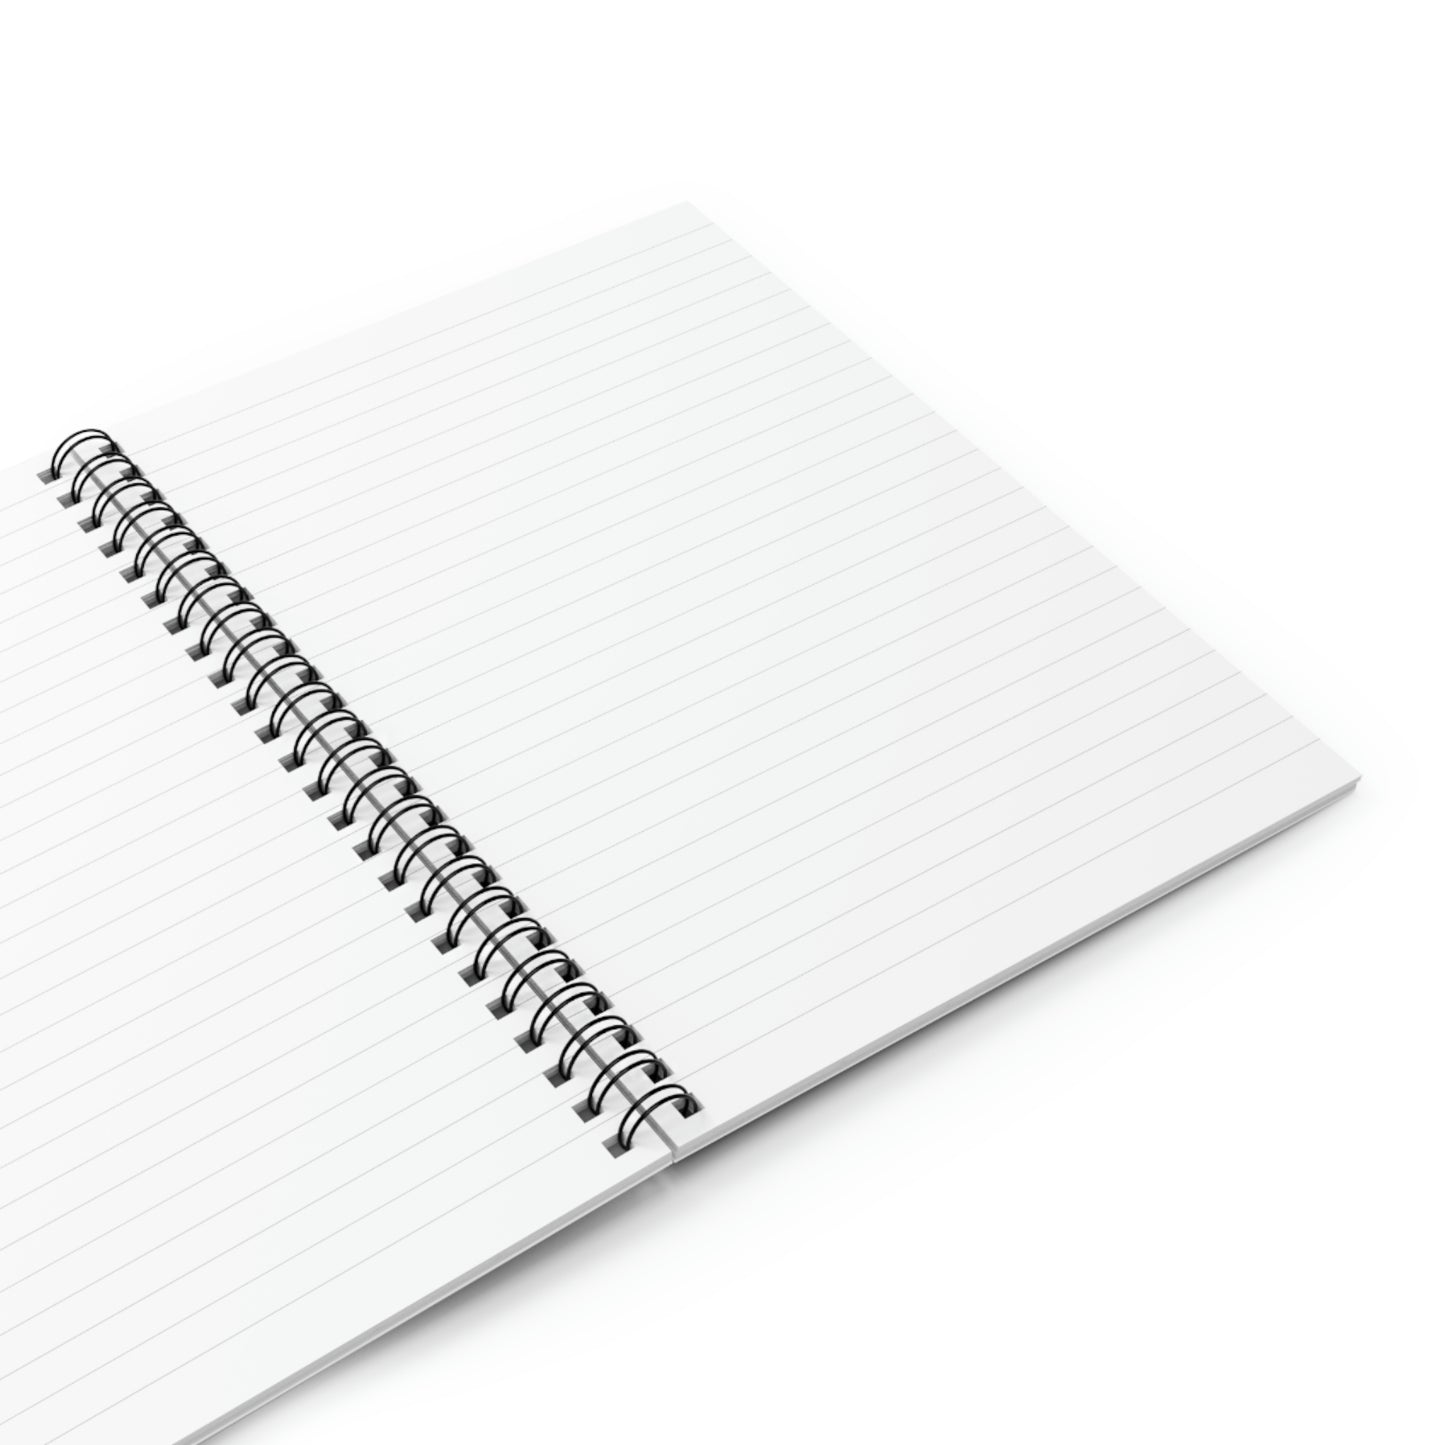 Copy of Spiral Notebook - Ruled Line